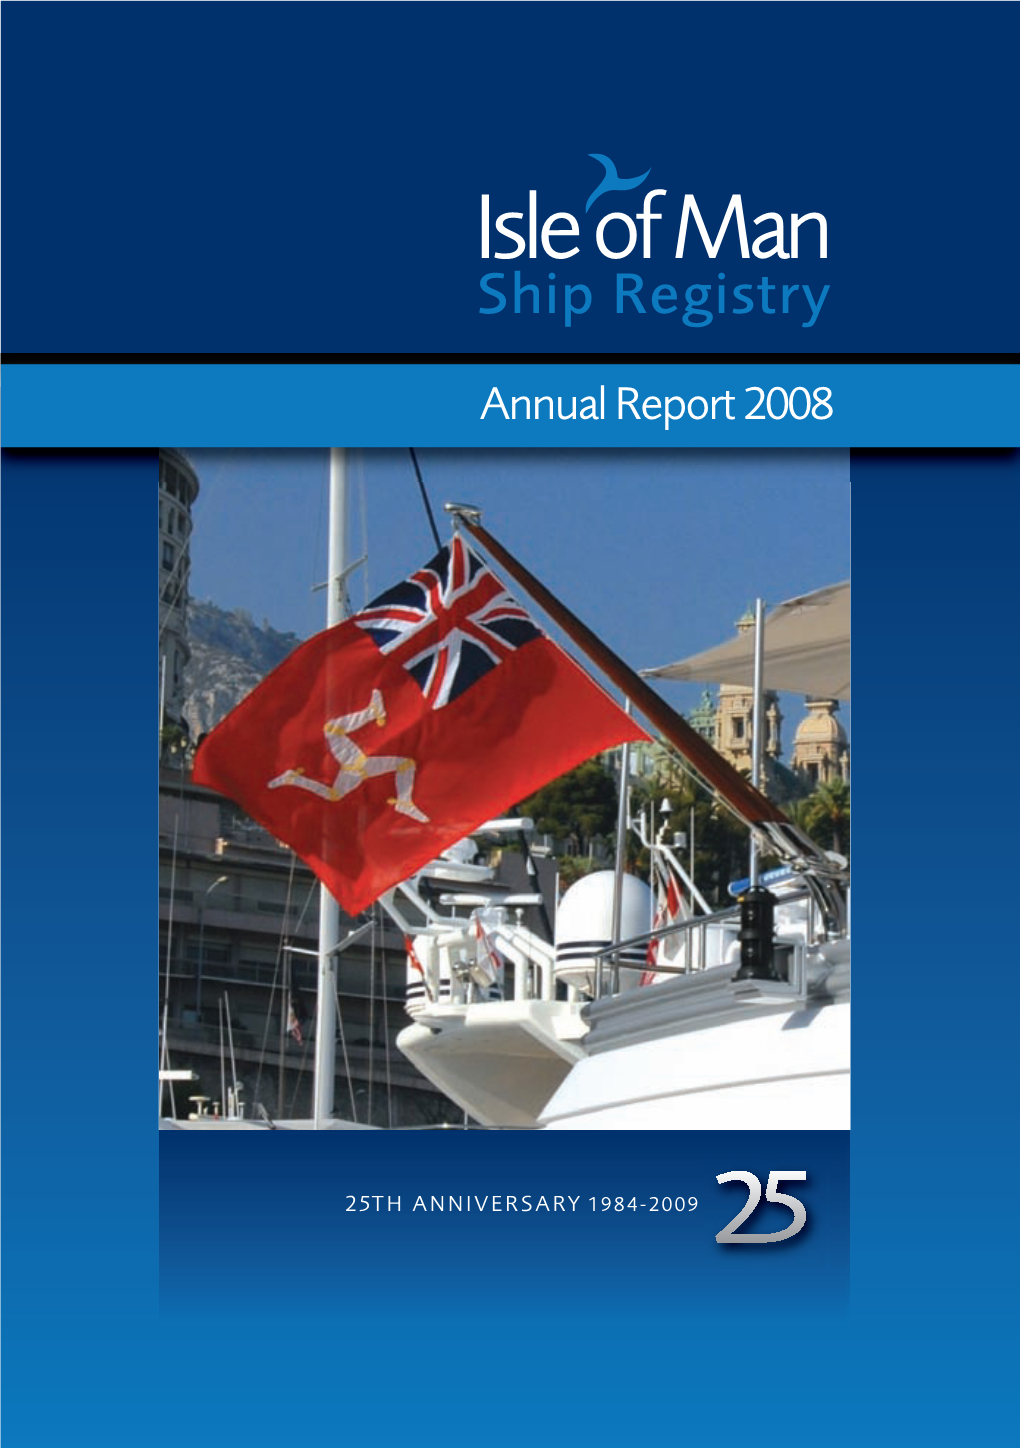 2008 Annual Report Can Be Provided in Large Print, on Request